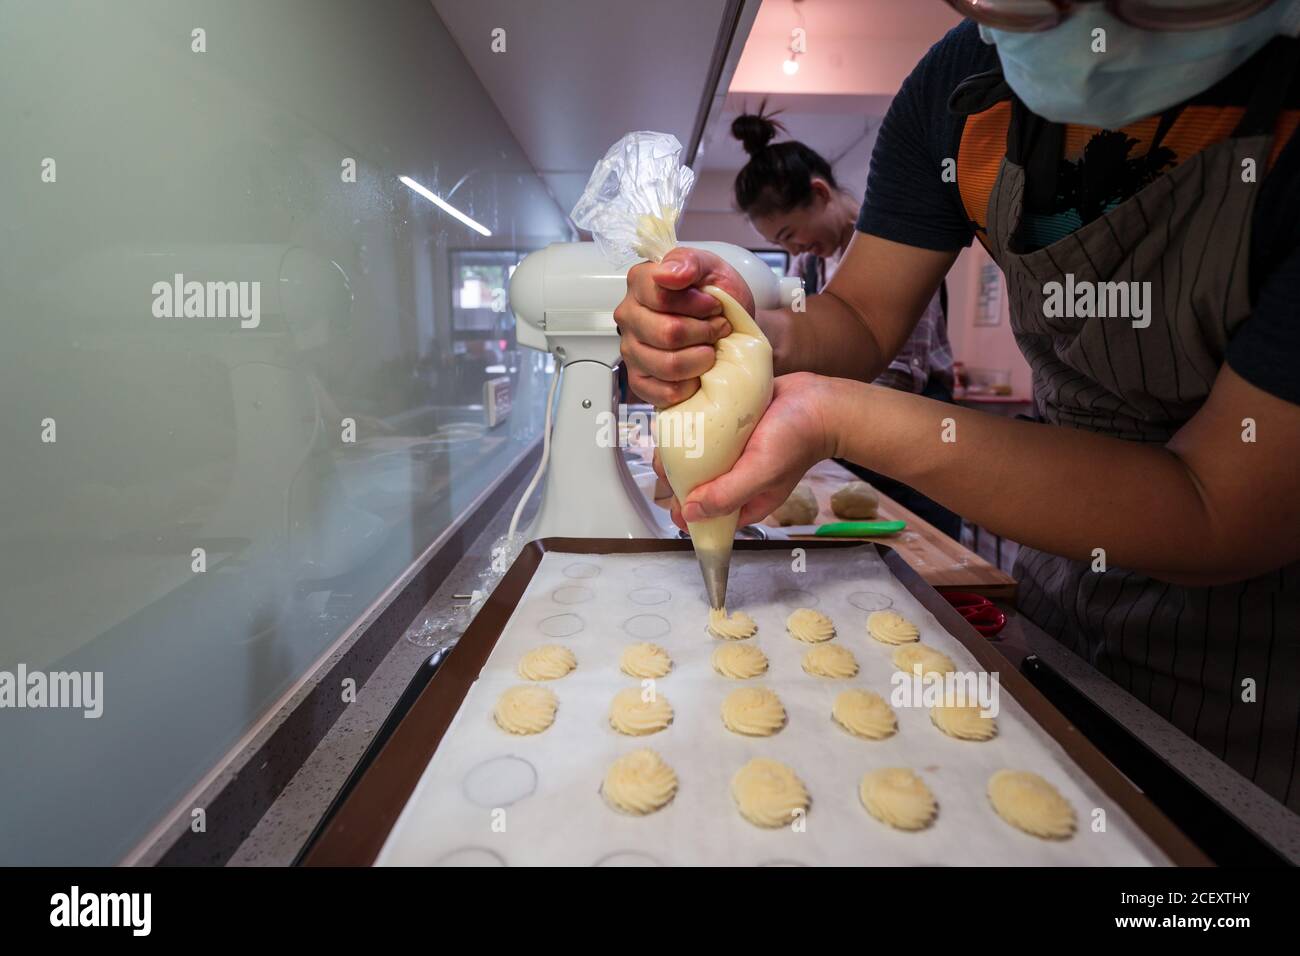 https://c8.alamy.com/comp/2CEXTHY/anonymous-person-with-pastry-bag-piping-cookie-batter-on-baking-pan-at-wooden-table-2CEXTHY.jpg